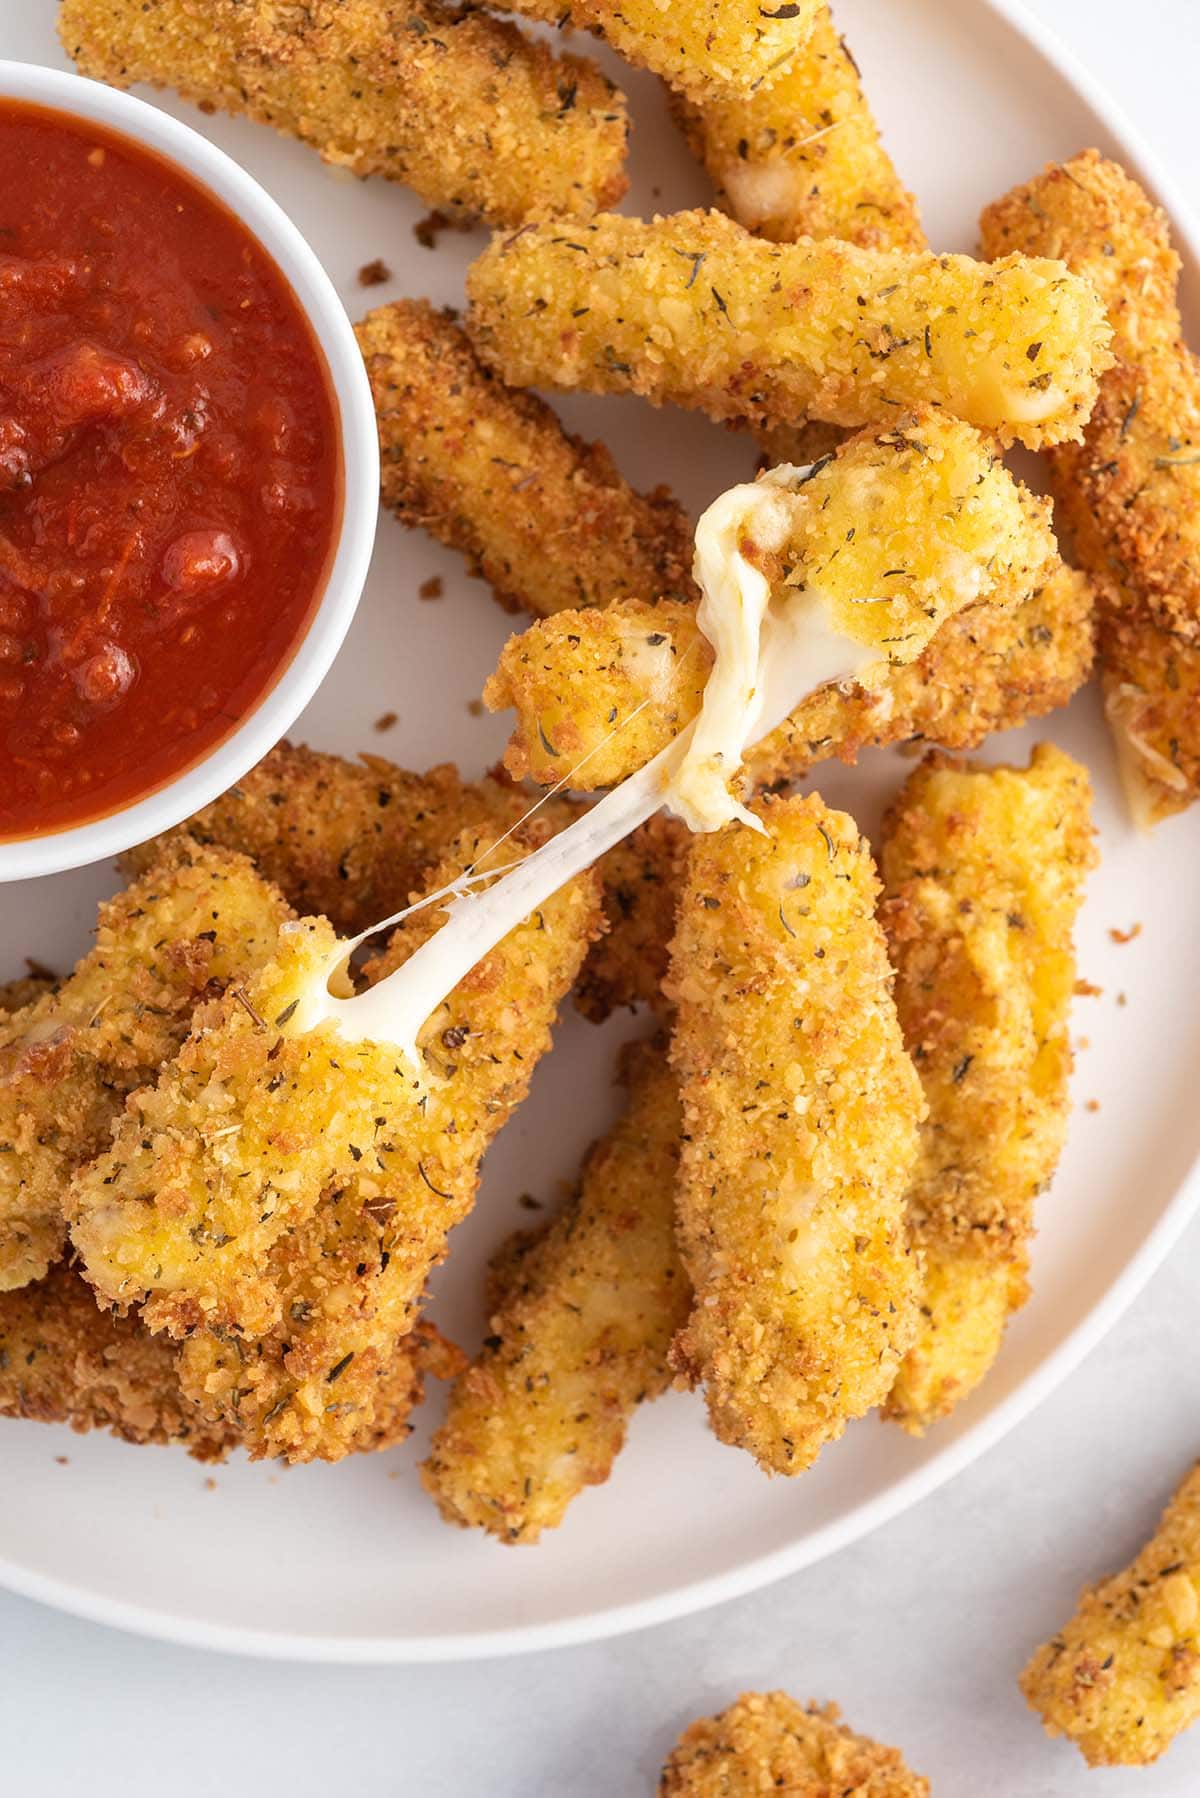 cheese sticks on a plate